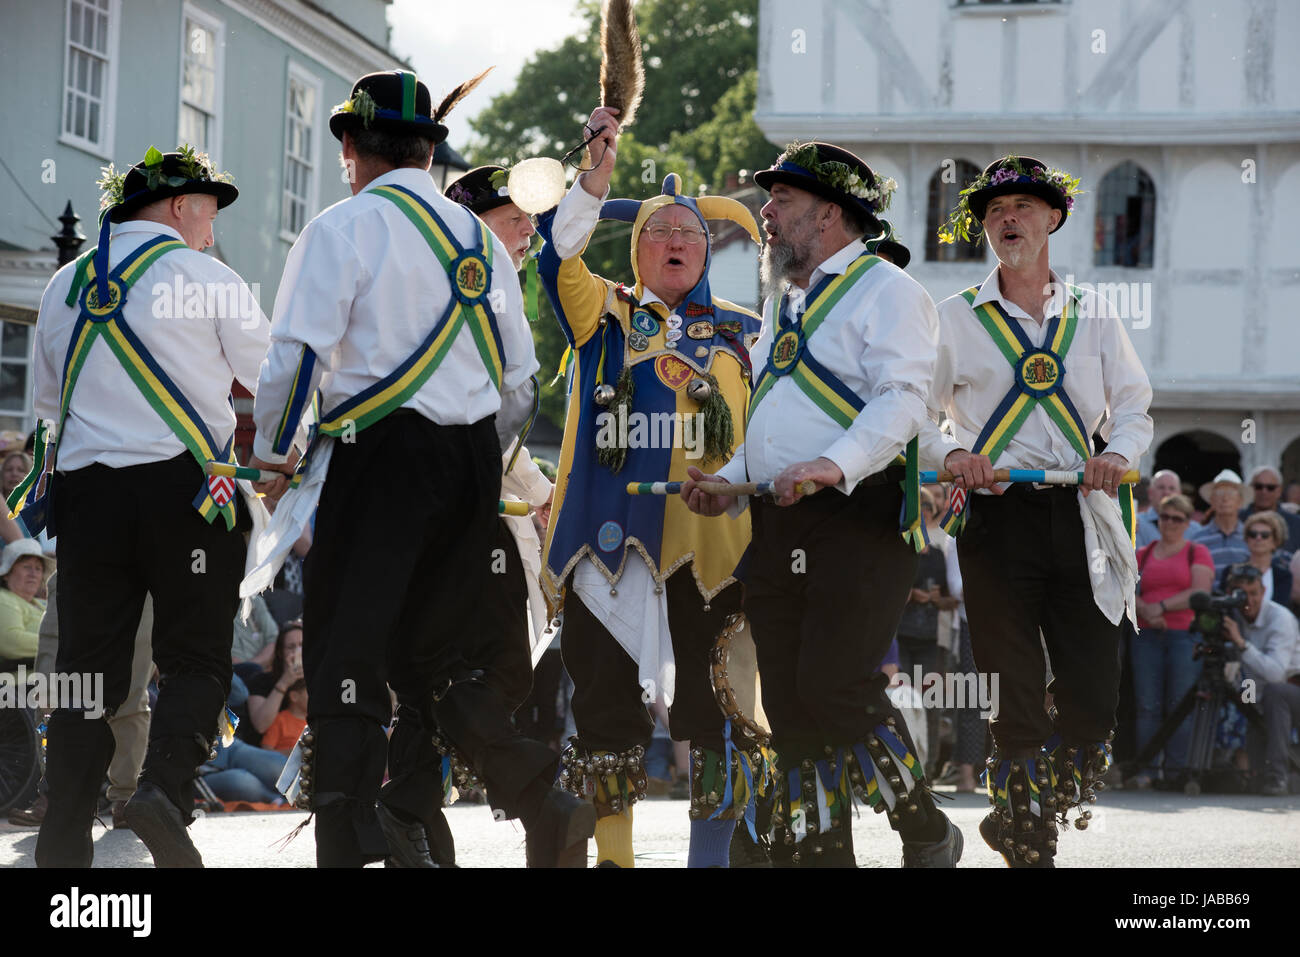 Thaxted Morris Weekend 3-4 June 2017 A meeting of member clubs of the Morris Ring celebrating the 90th anniversary of the founding of the Thaxted Morris Dancing side or team in Thaxted, North West Essex, England UK.  Long Man side side perfom in Town Street Thaxted Essex during the early evening mass dancing through the town. Hundred of Morris dancers from the UK and this year the Silkeborg side from Denmark spend most of Saturday dance outside pubs in nearby villages where much beer is consumed. In the late afternoon all the sides congregate in Thaxted where massed dancing is perfomed along T Stock Photo